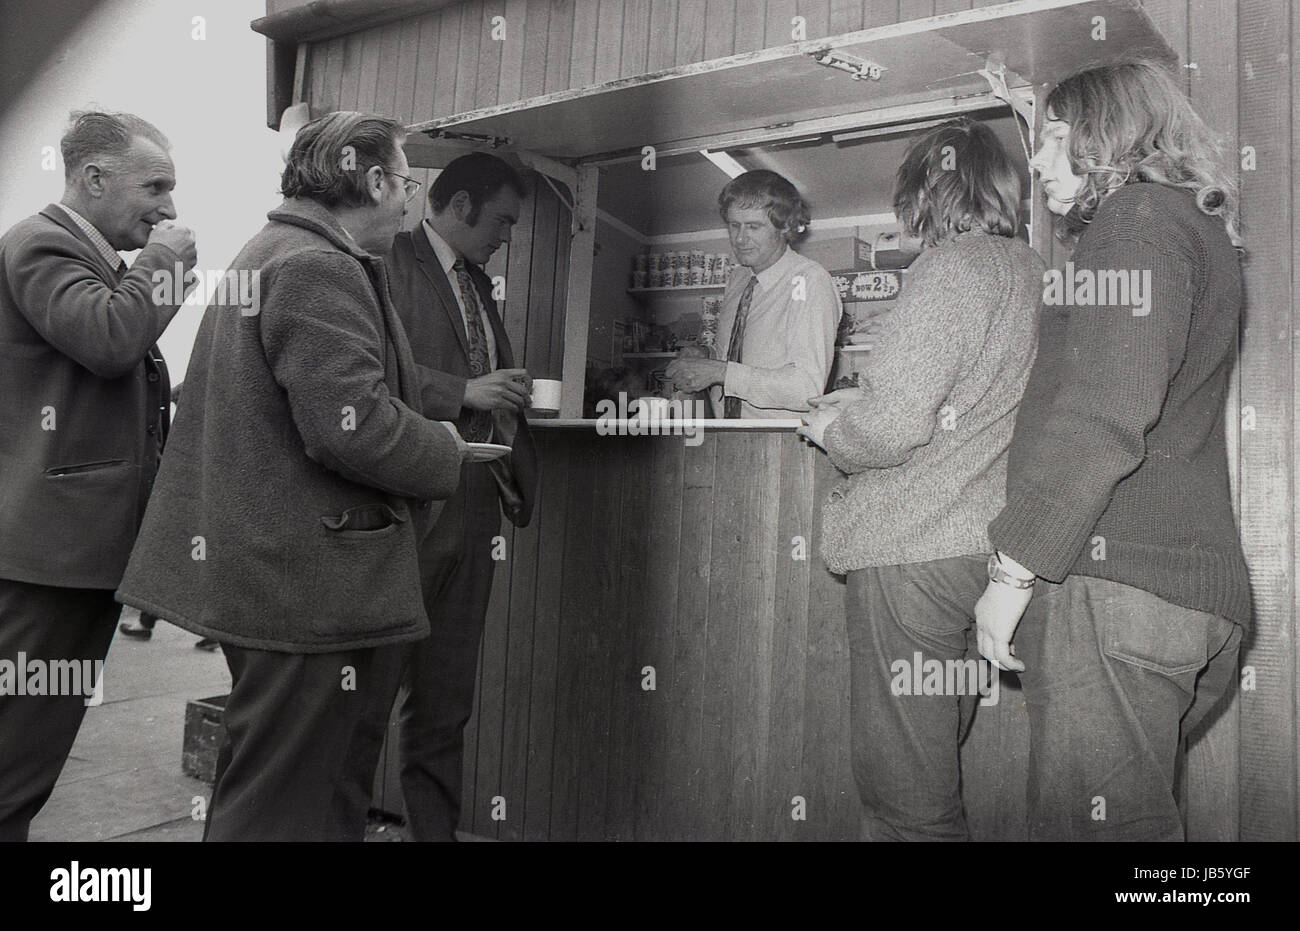 1973, historical picture, customers standing at the counter outside the famous Blackheath Tea Hut. A simple, basic snack bar, the small wooden hut with a service hatch for light food and beverages was a well known rest stop for people travelling on the A2 road at Greenwich, South London, SE3. An opportunity for a break, a cup of tea and some social interaction during one's journey. Stock Photo